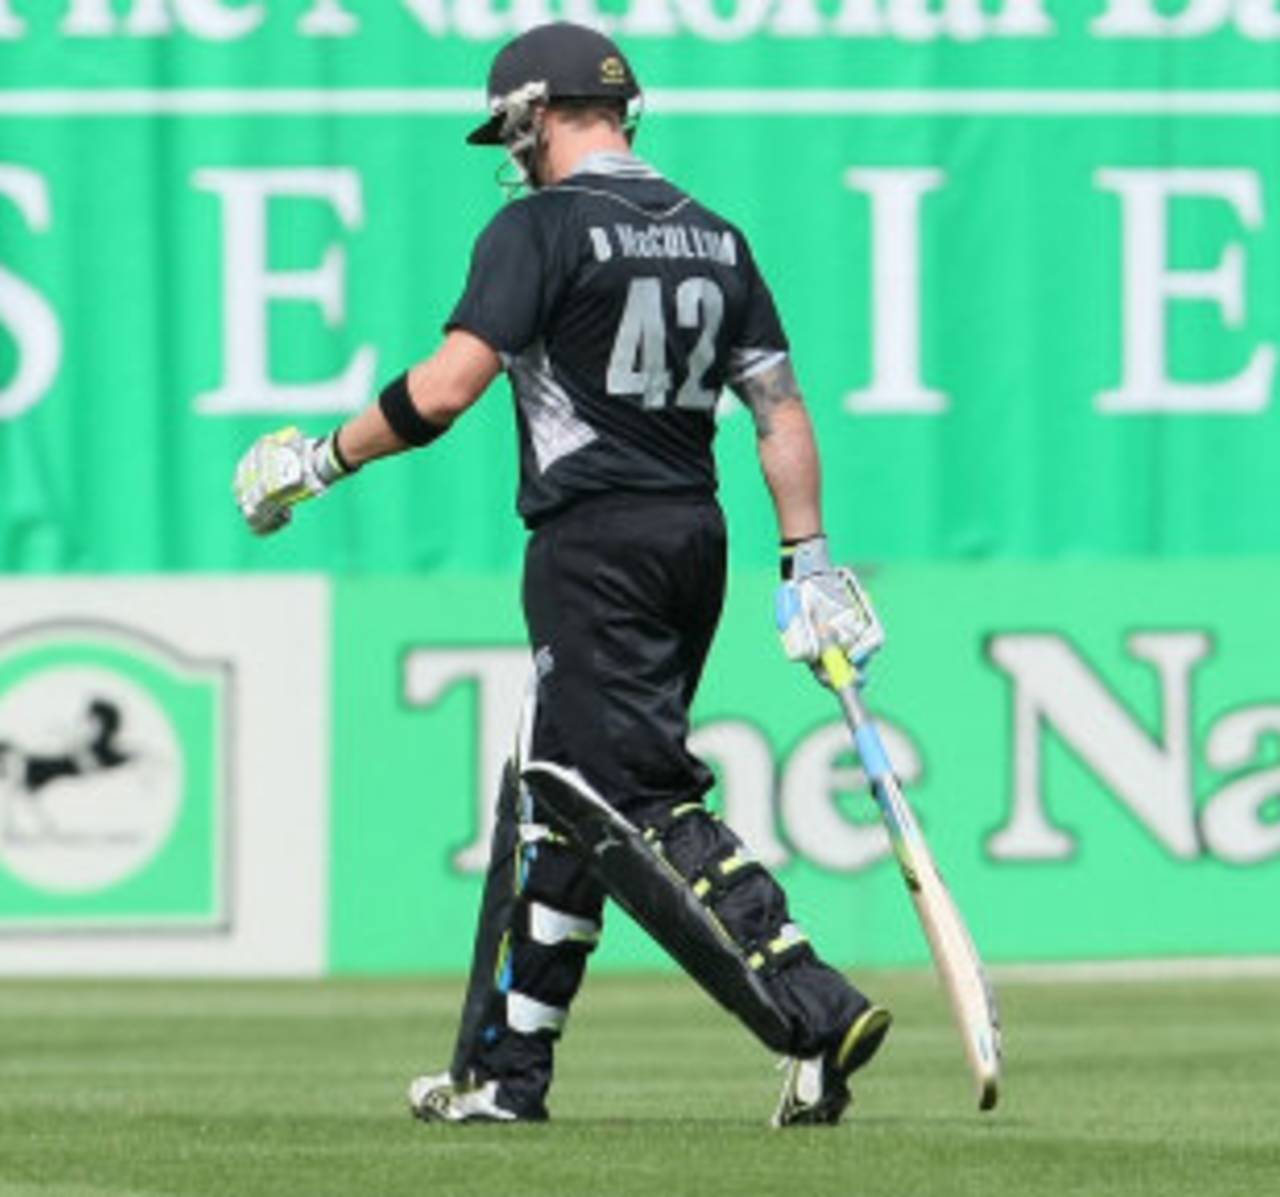 'There are some rough edges we need to smooth out,' says Brendon McCullum&nbsp;&nbsp;&bull;&nbsp;&nbsp;Getty Images